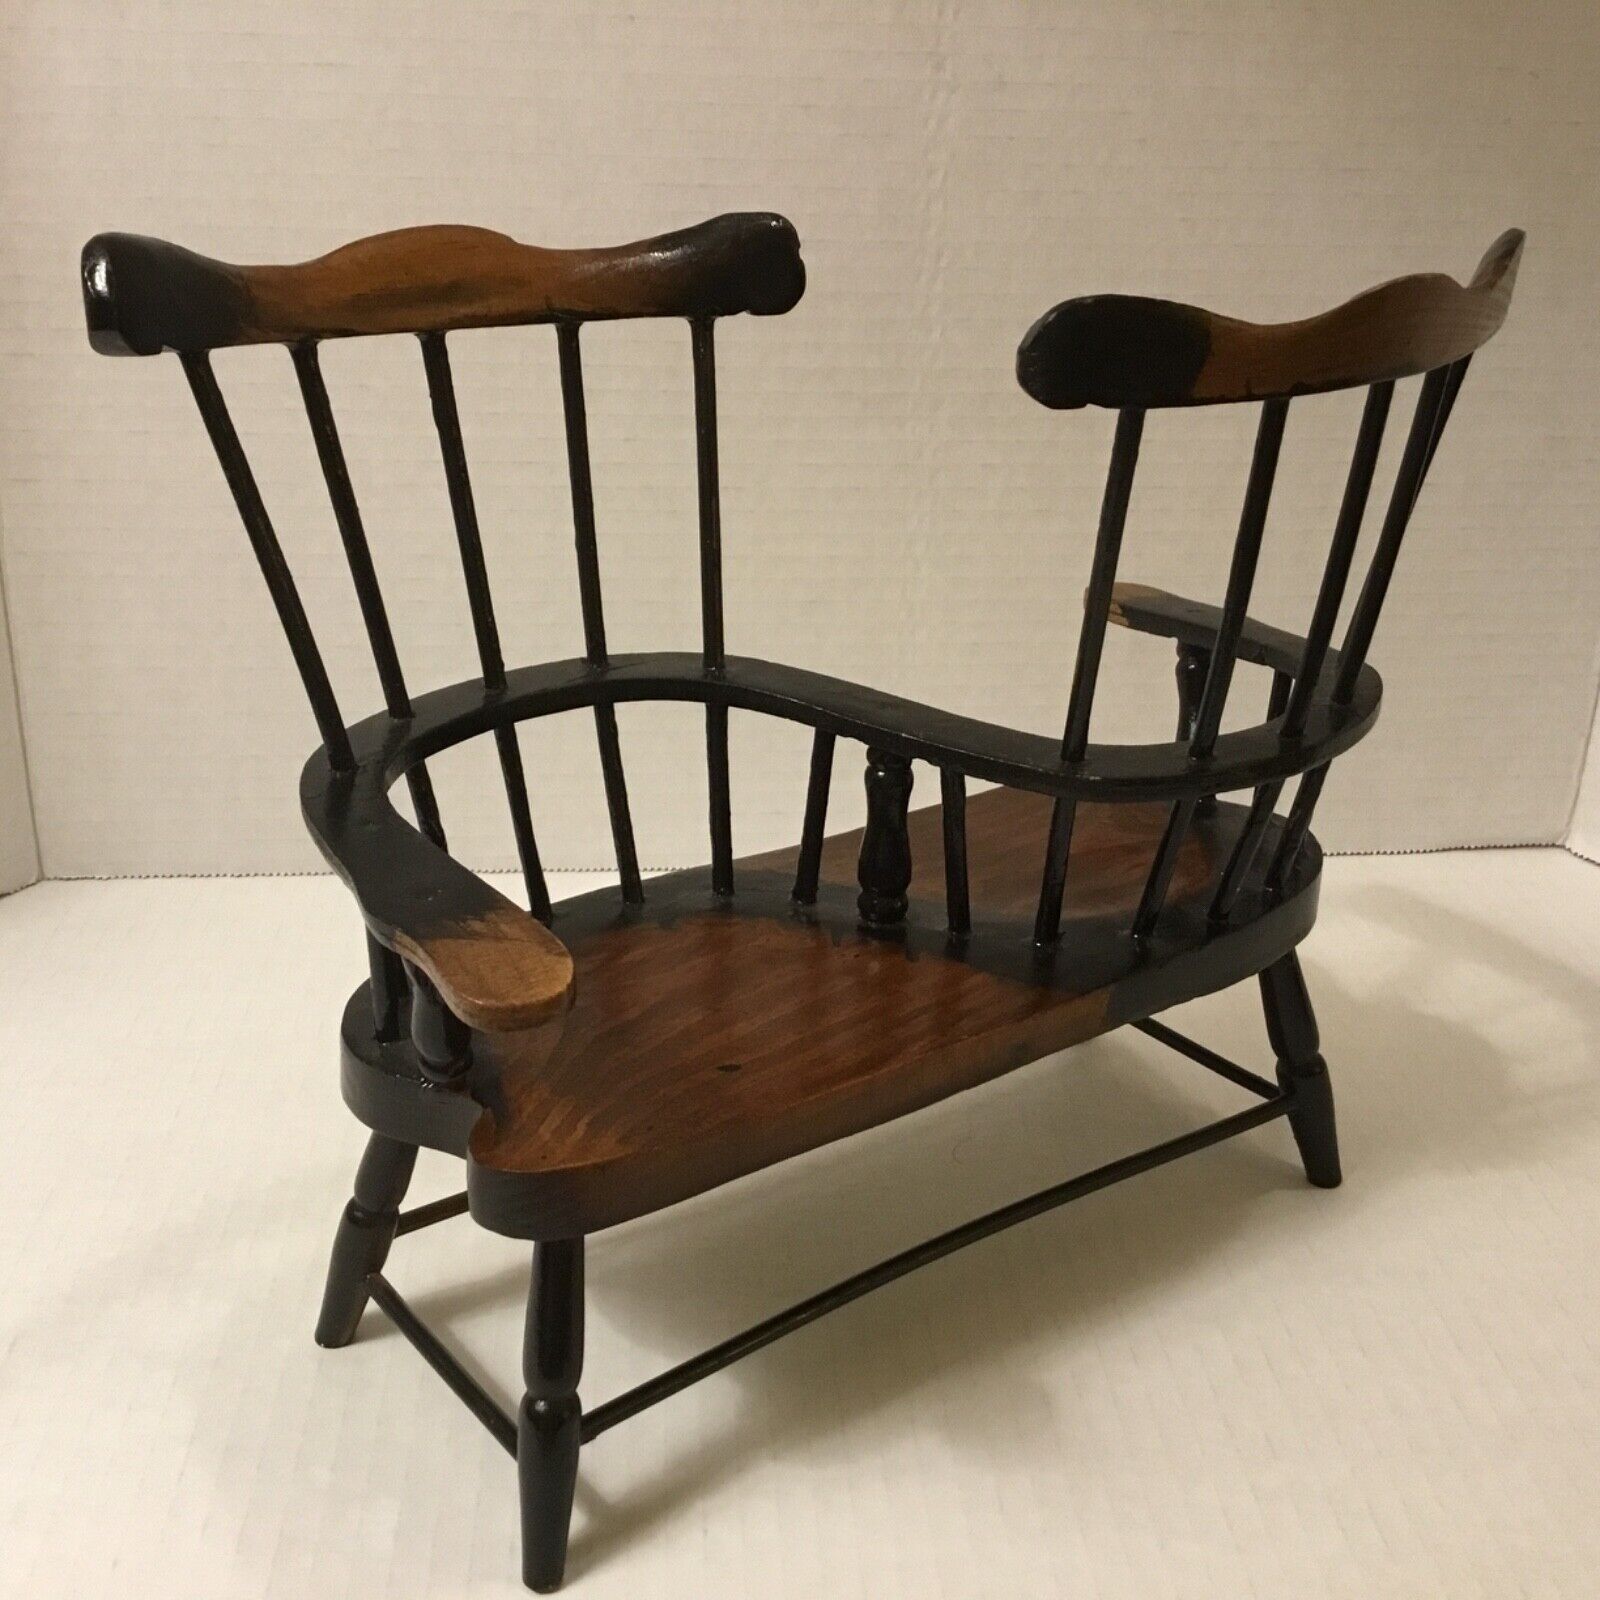 VINTAGE MINIATURE DOLL CONVERSATION (KISSING) CHAIRS/ BENCH EXCELLENT CONDITION